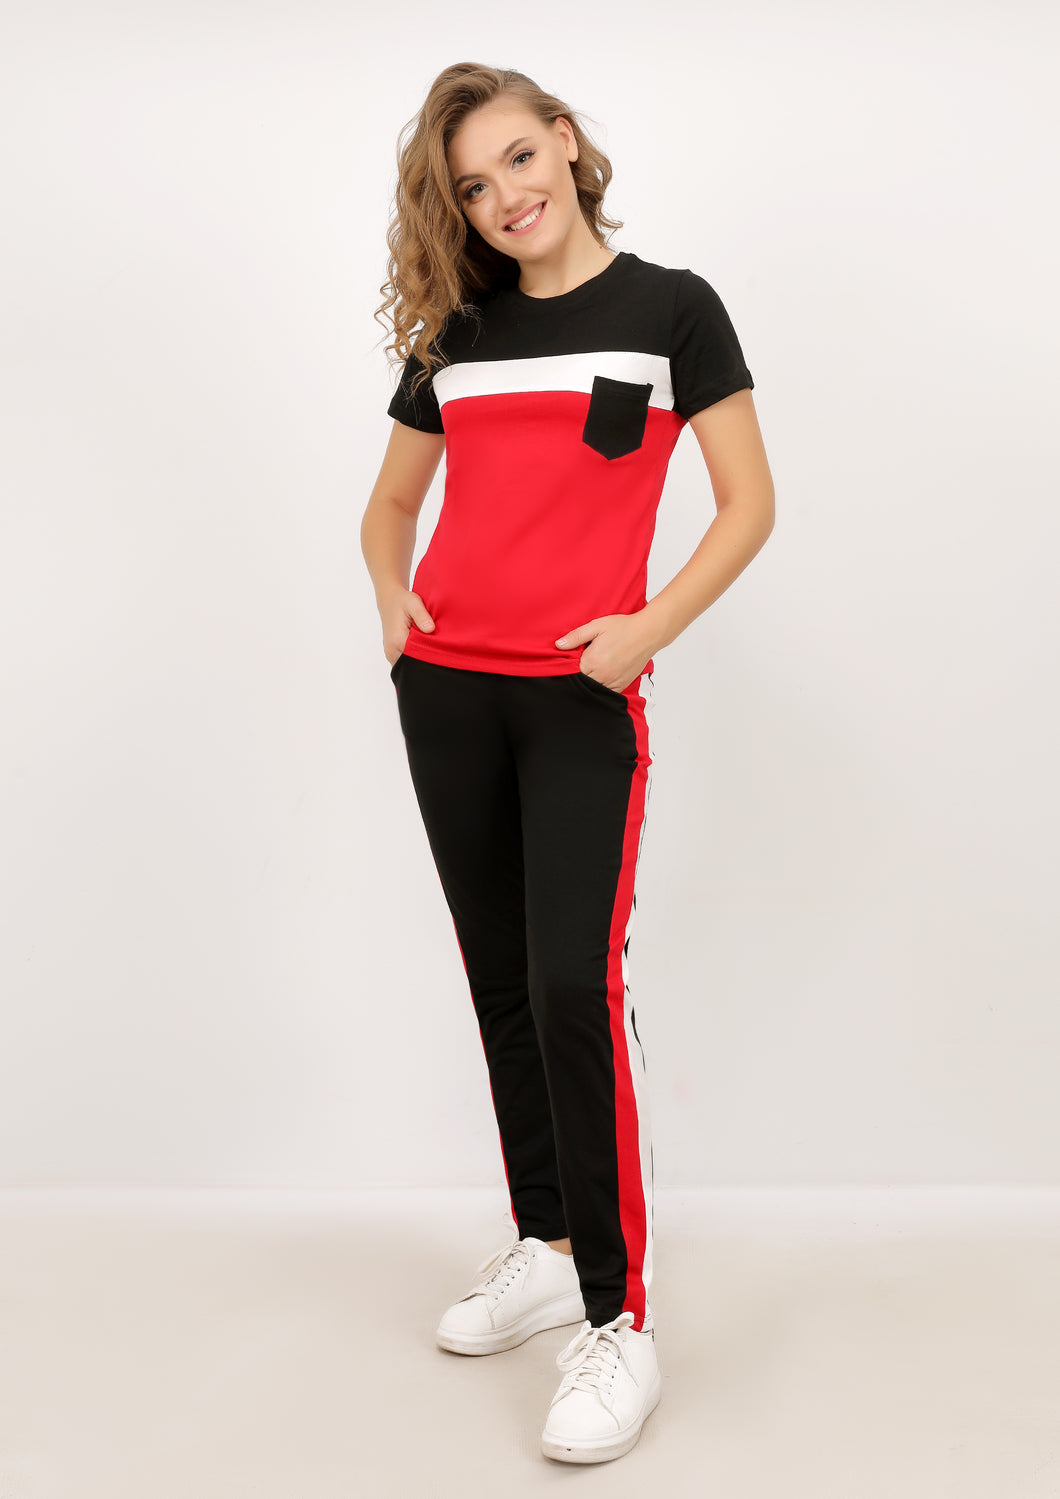 Short-sleeved red and black cotton Sportsuit